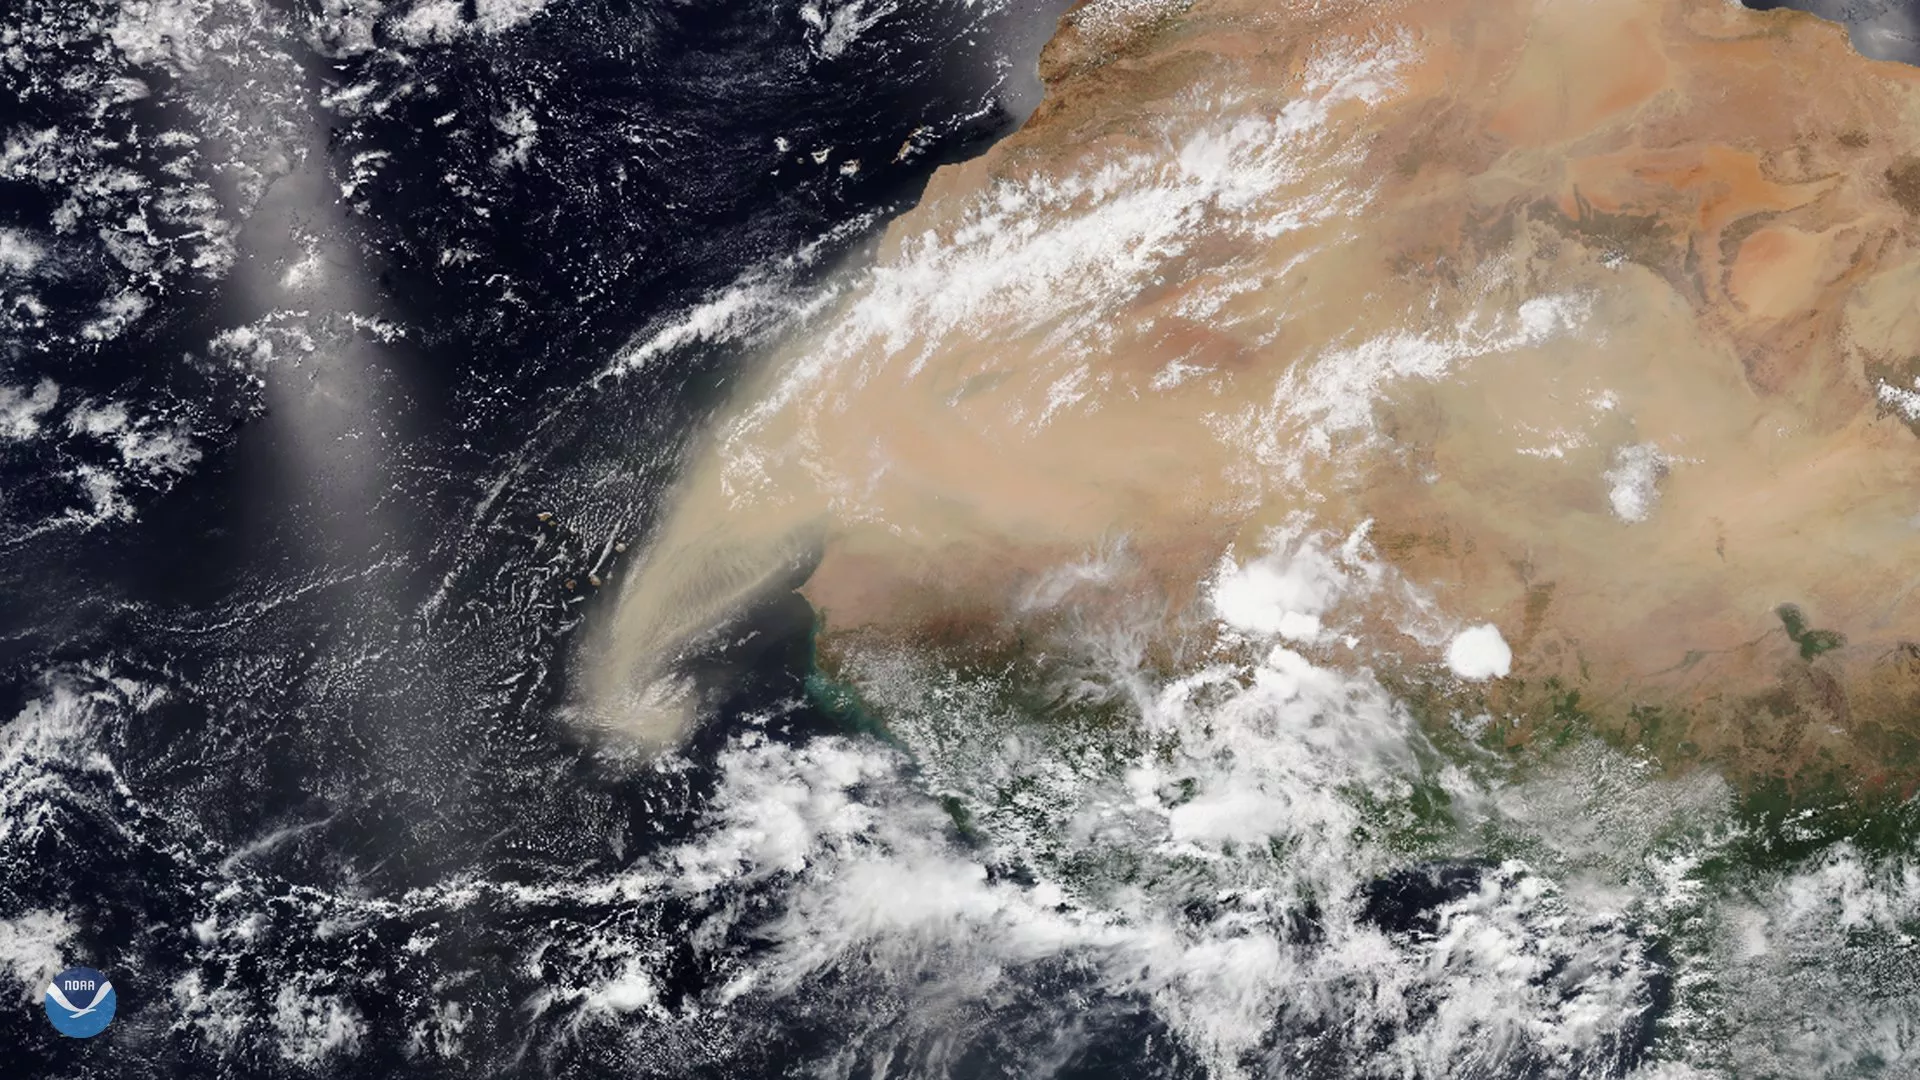 Large brown dust plume mixed with white clouds is seen over Western Africa and extending over the Atlantic Ocean. 